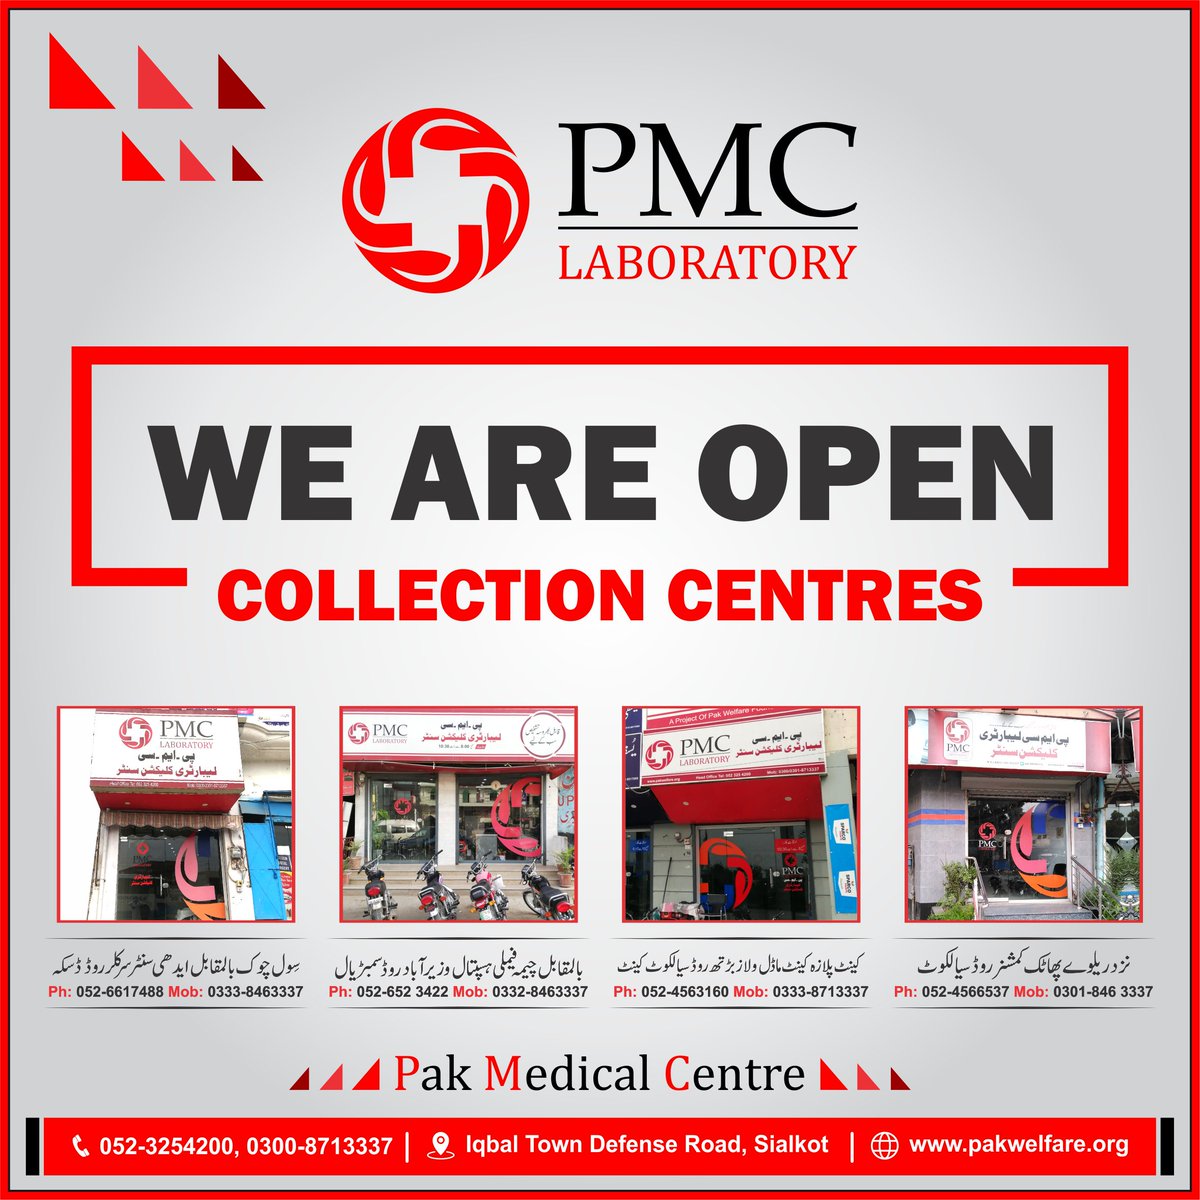 Pak Medical Centre: Announcement - Our Collection Centers are opened for sample collection.

#pmc_sialkot #pakmedicalcentre #pmc #pmc_collectioncentre #collection_centre #pak_medical_centre #pmc_daska #pmc_commissioner_road #pmc_cantt #pmc_sambrial